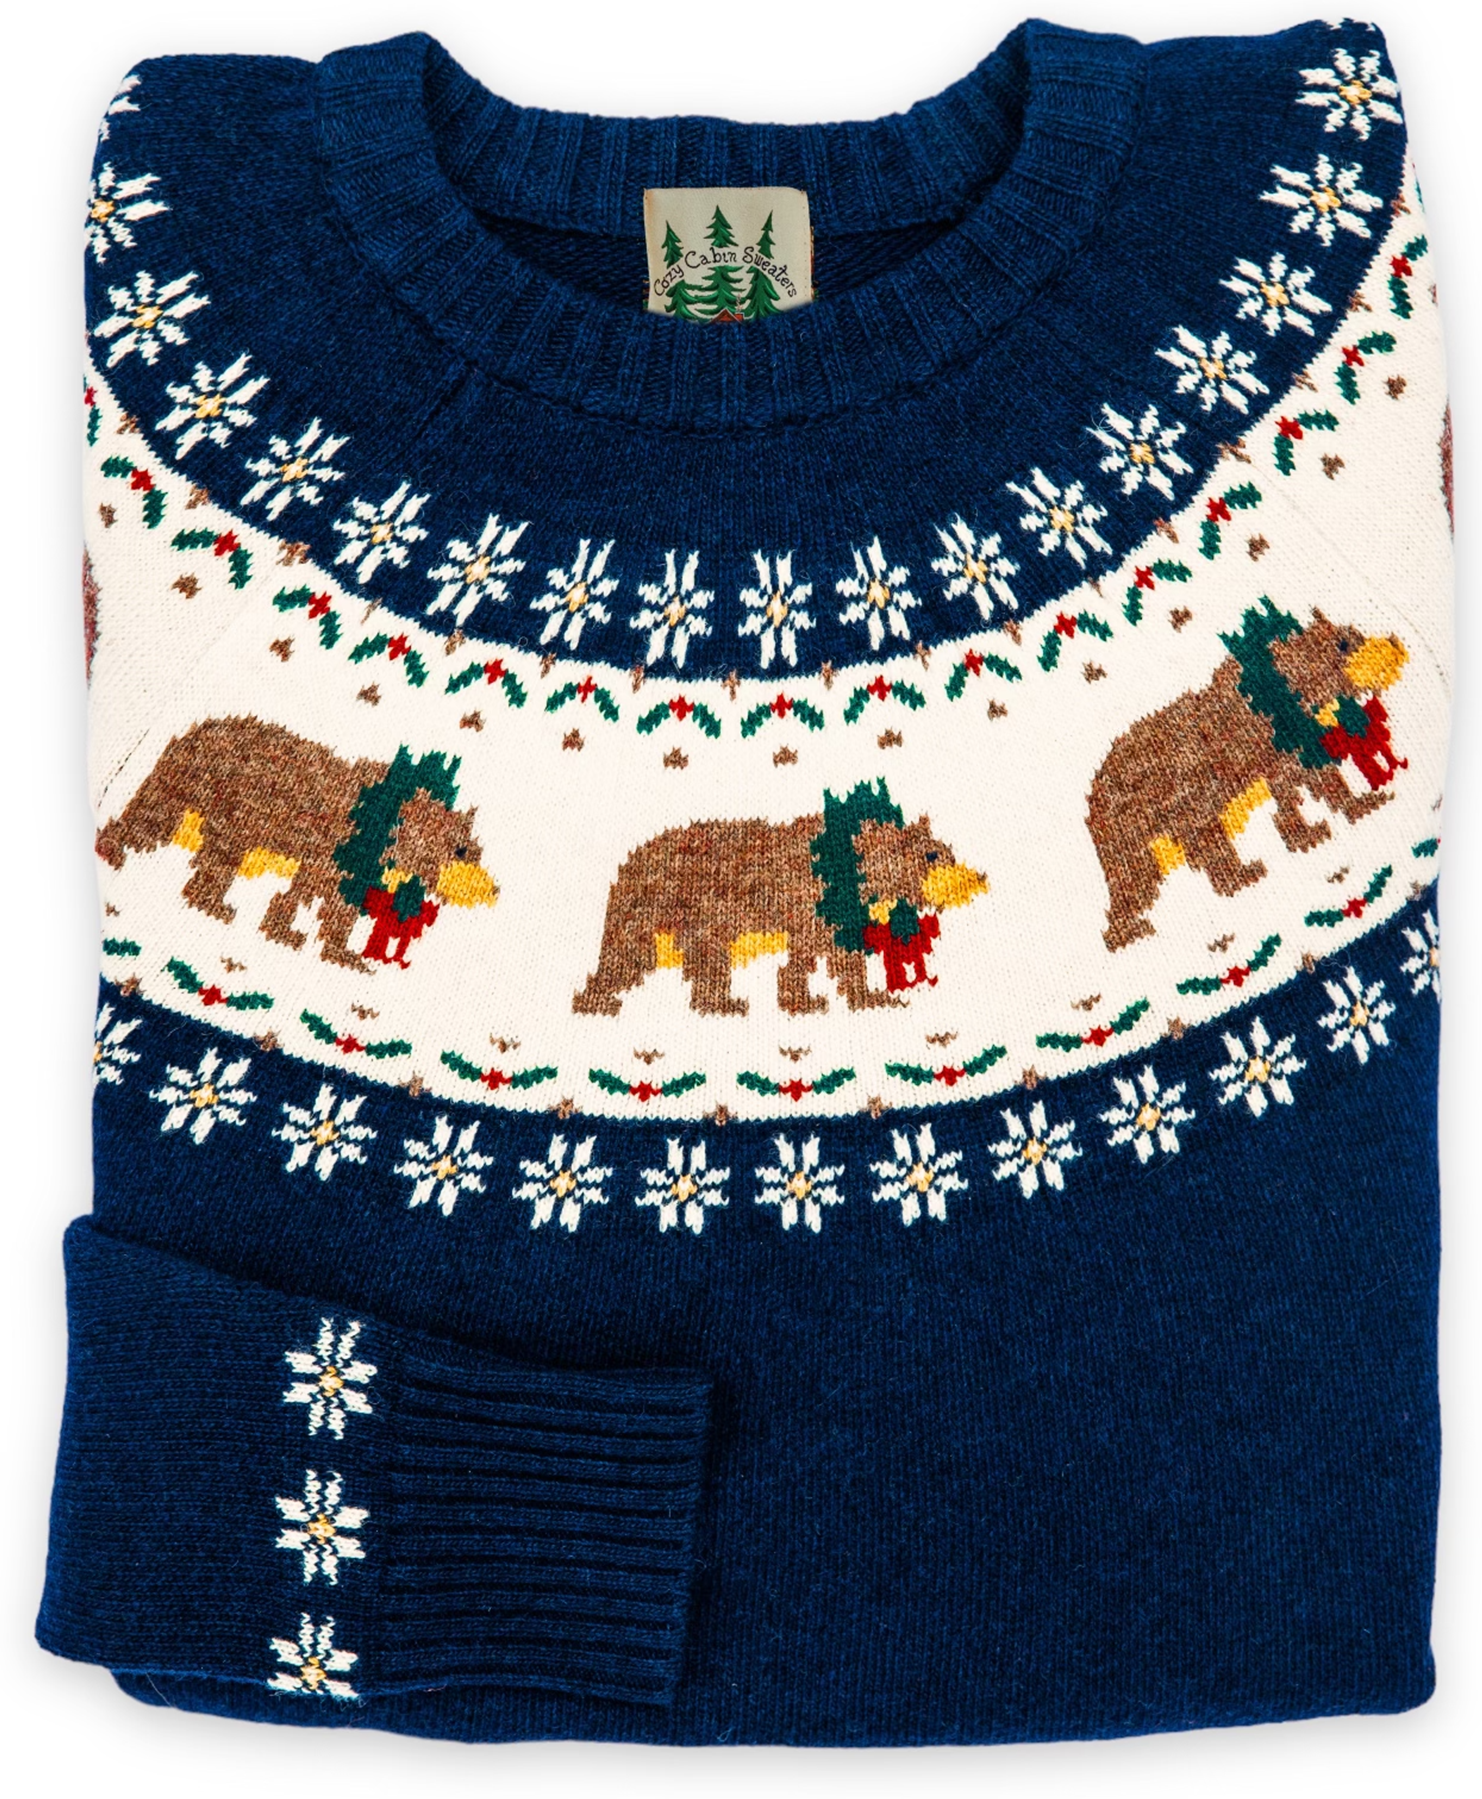 Make different styles by wearing womens
christmas sweaters